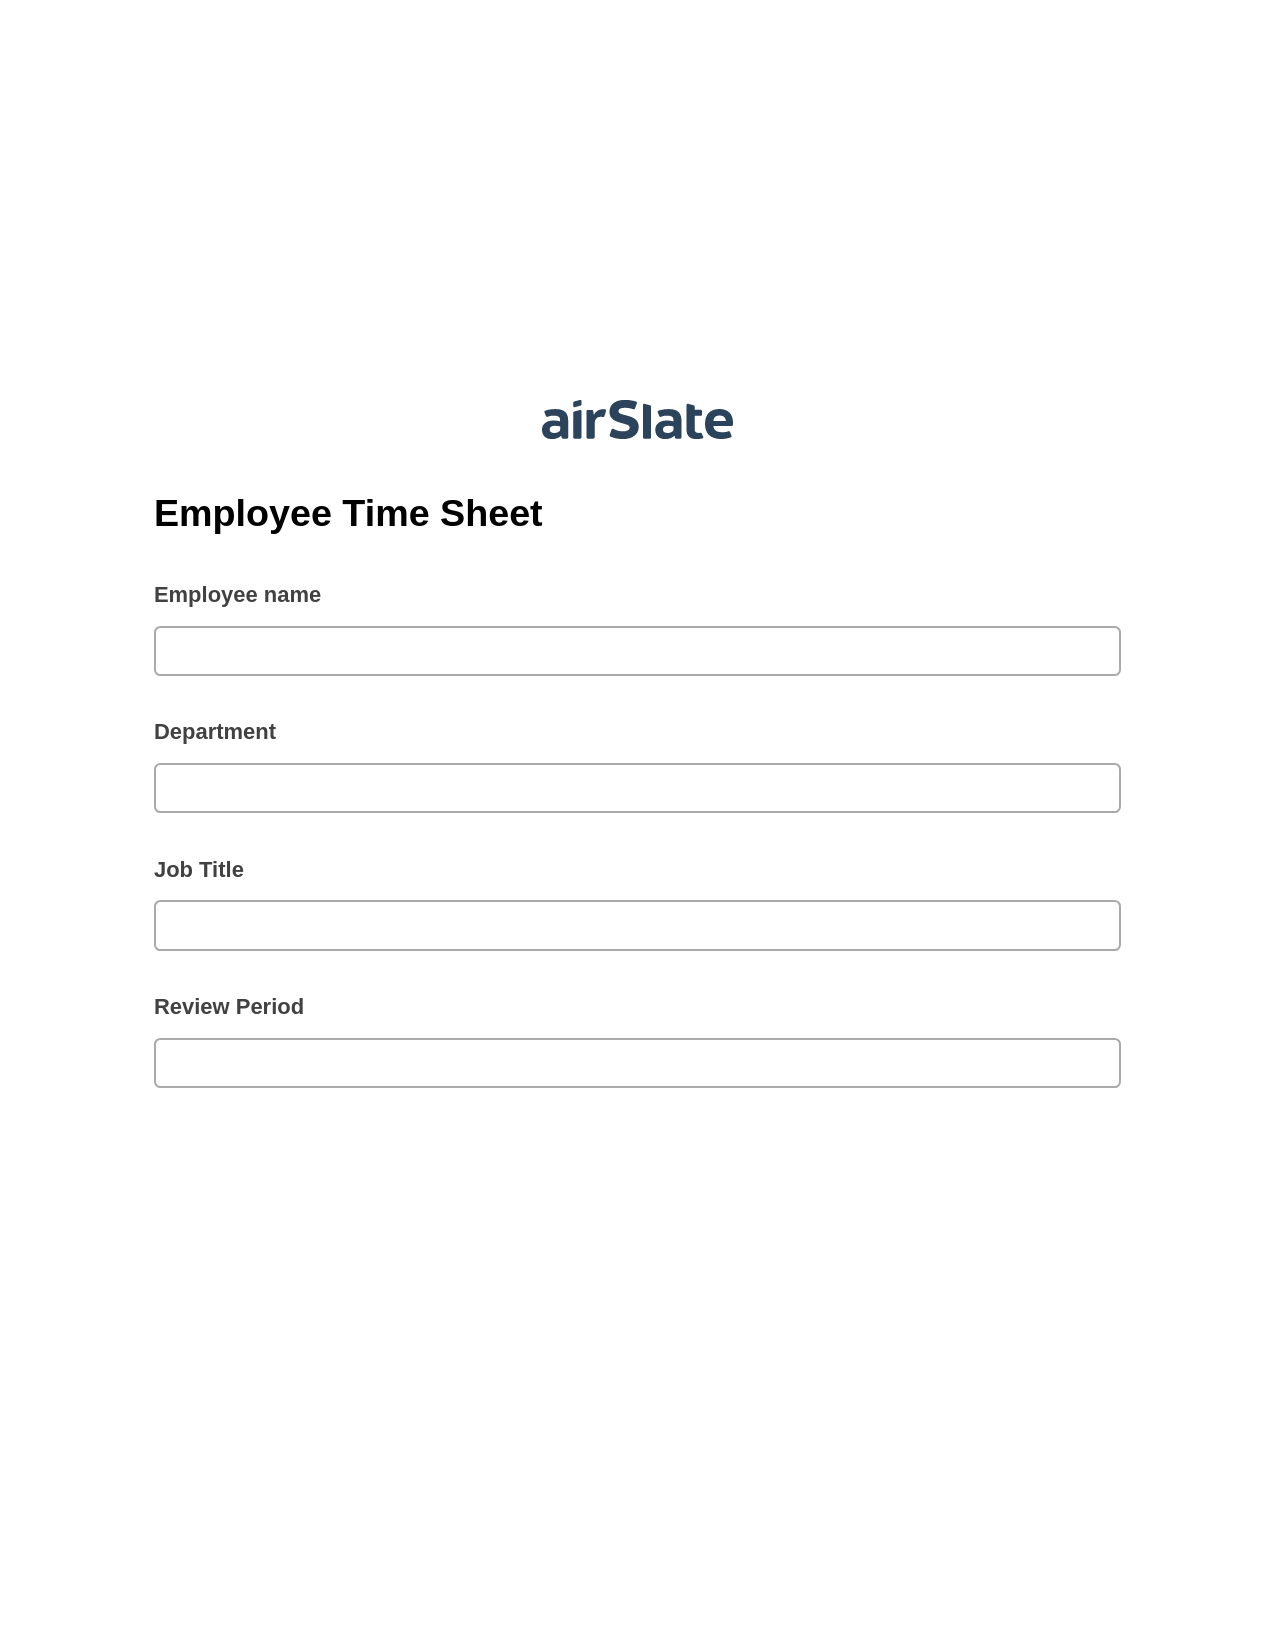 Employee Time Sheet Prefill from NetSuite records, Create Salesforce Records Bot, Export to Smartsheet